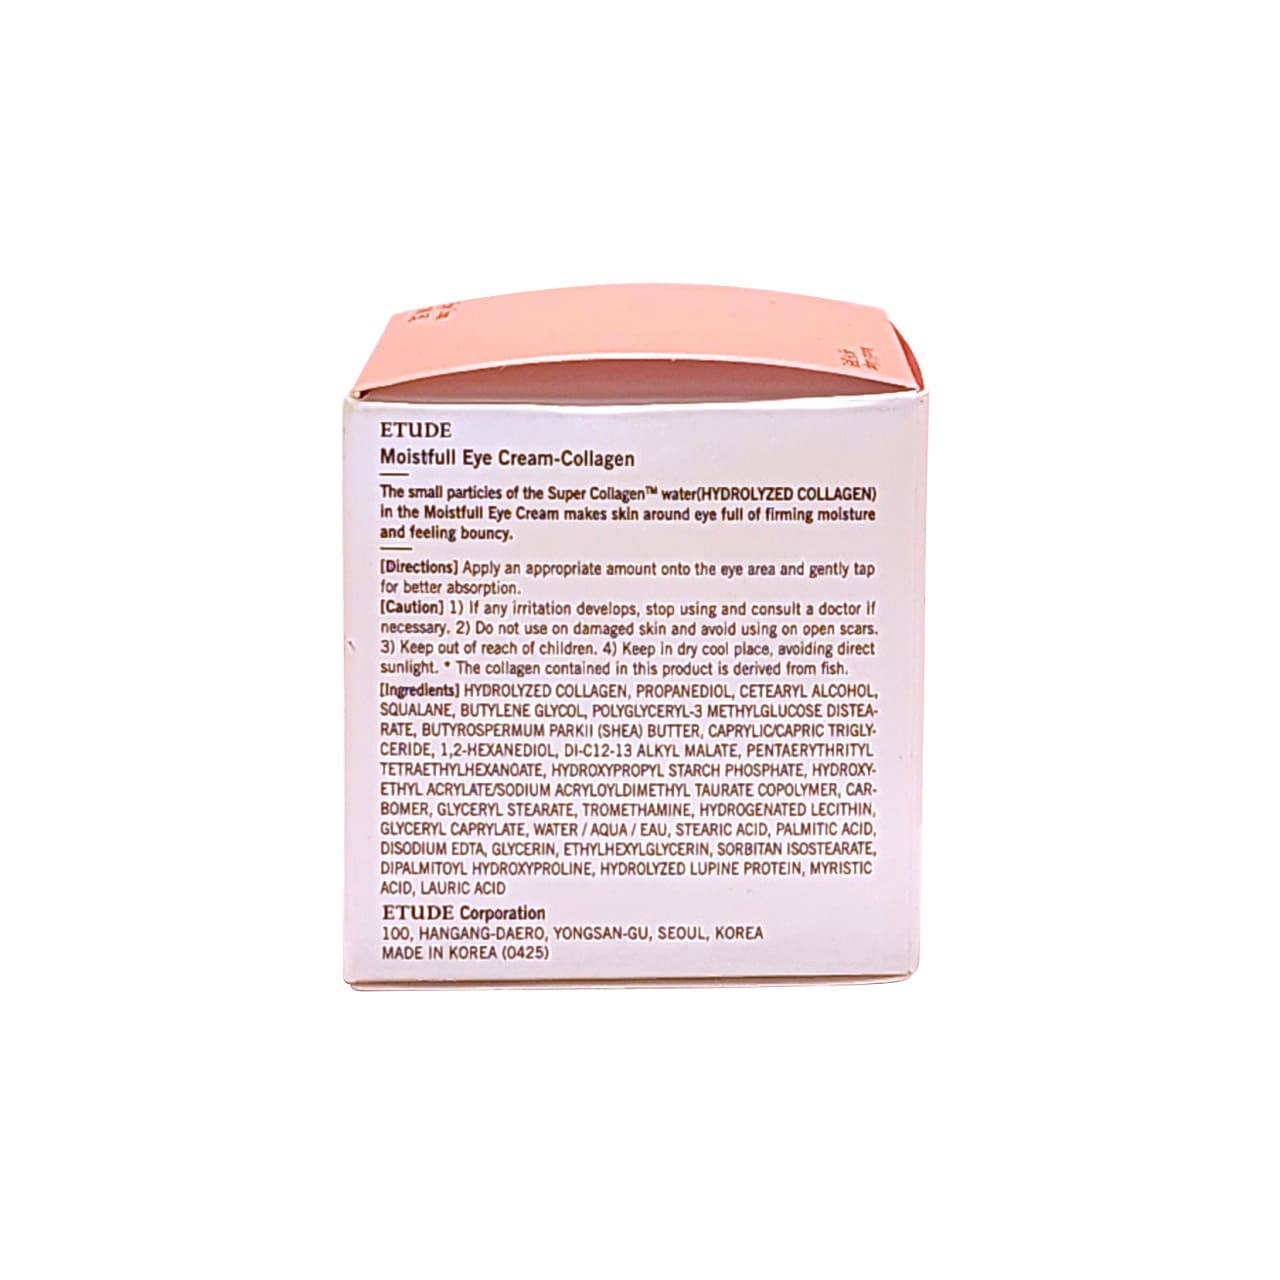 Description, directions, cautions, ingredients for Etude House Moistfull Collagen Eye Cream (28 mL) in English